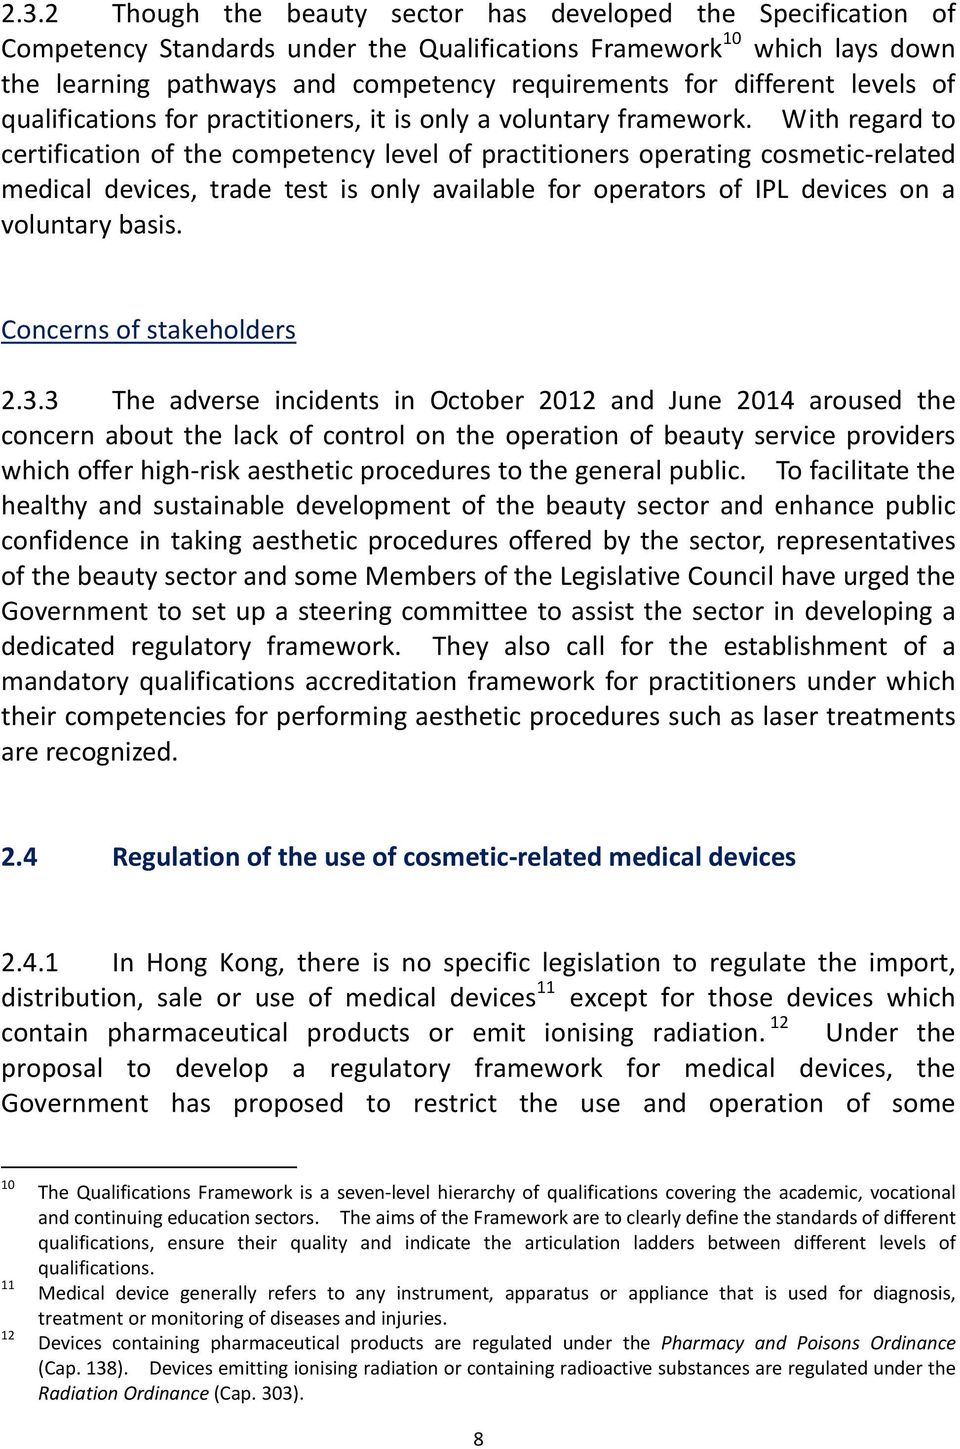 With regard to certification of the competency level of practitioners operating cosmetic related medical devices, trade test is only available for operators of IPL devices on a voluntary basis.